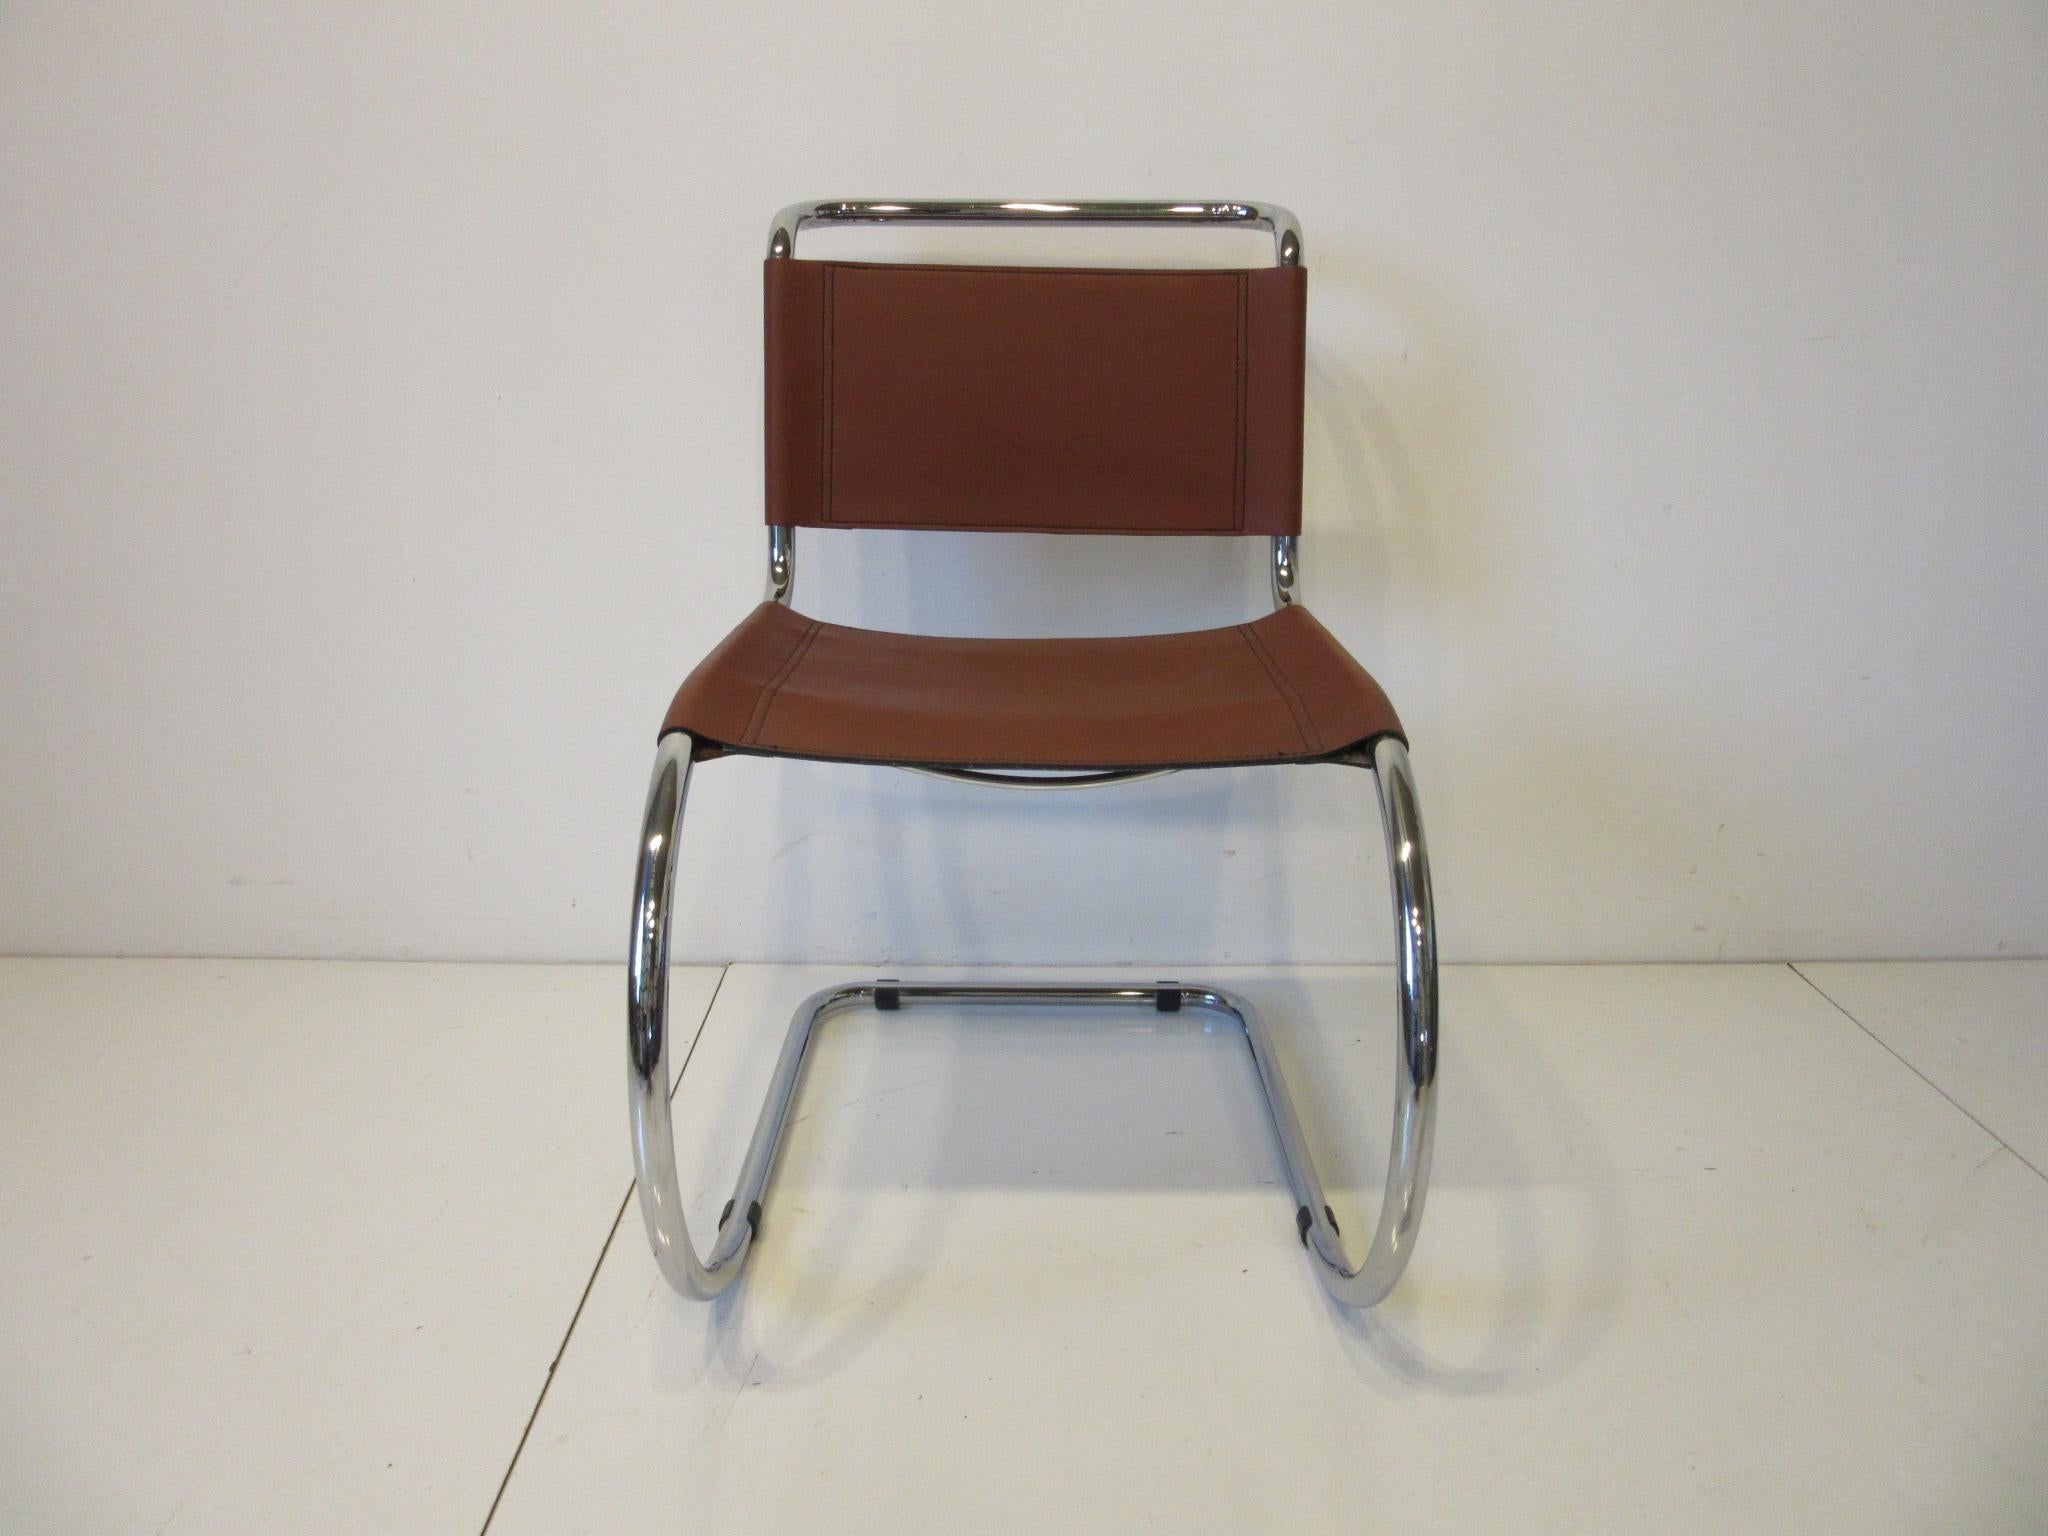 A set of four International Style saddle brown leather and chrome framed cantilever dining chairs designed by Ludwig Mies van der Rohe called the MR -10 chair. The perfect chair for any environment since they span the Machine Age, Art Deco and